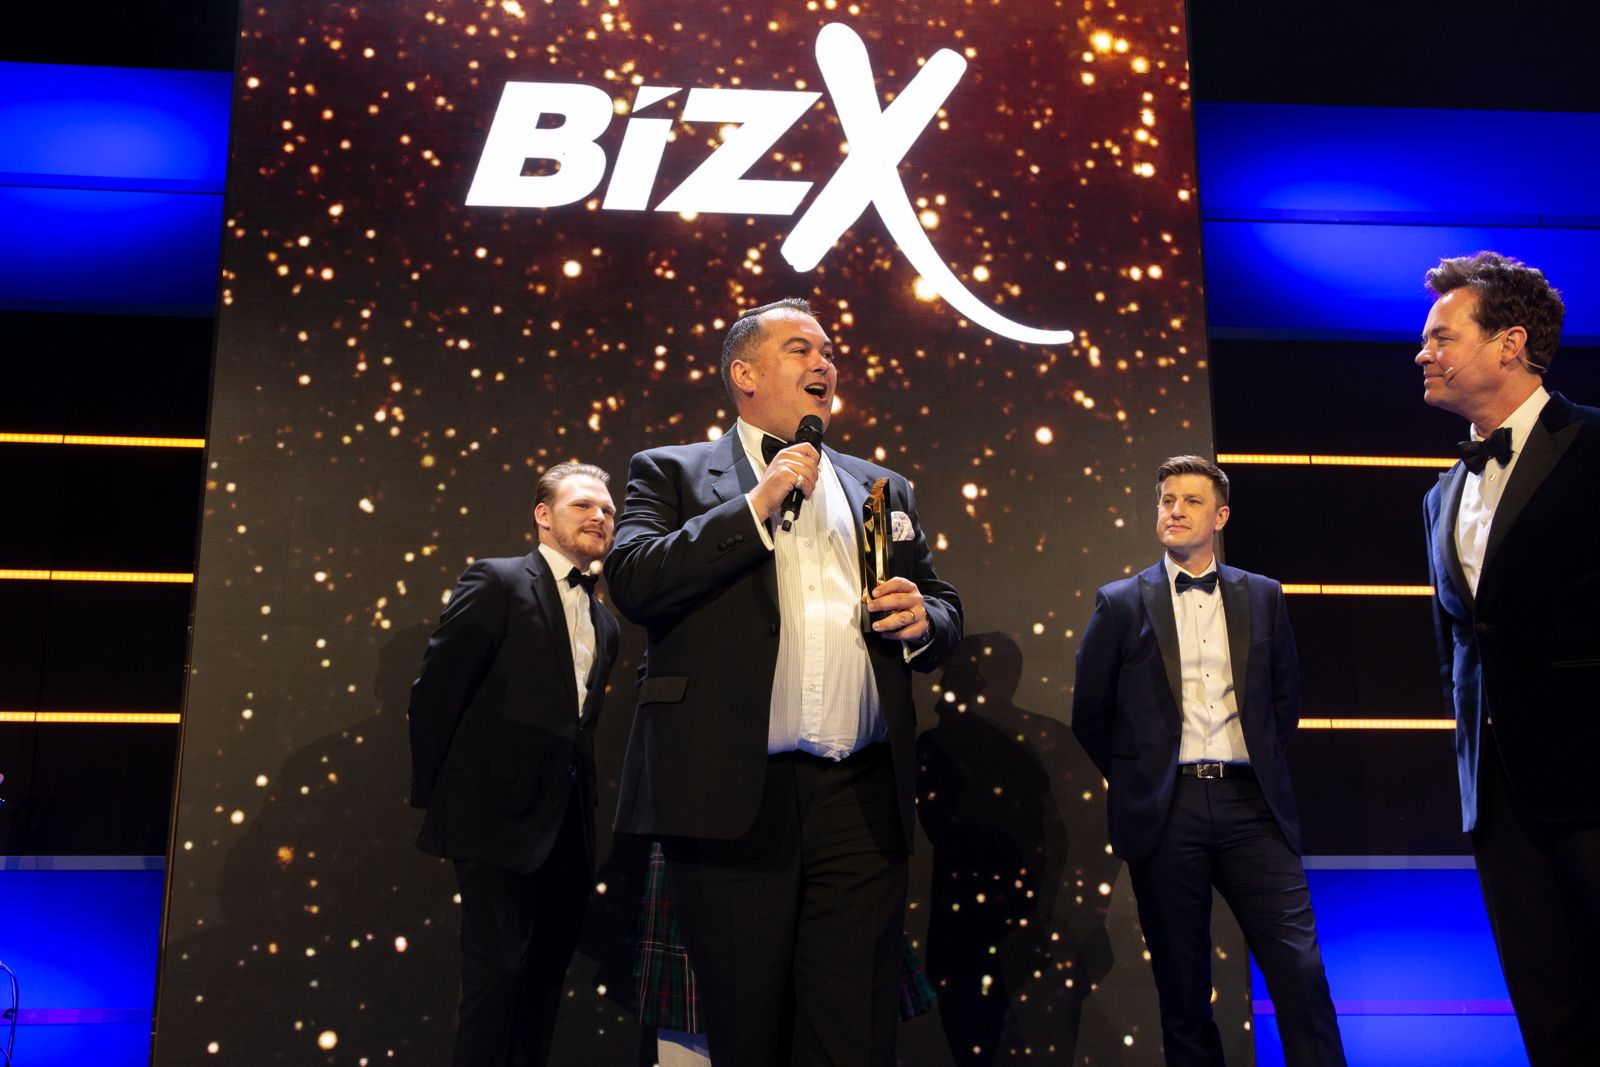 Iconic Digital Crowned Best Overall Business at European BizX Awards